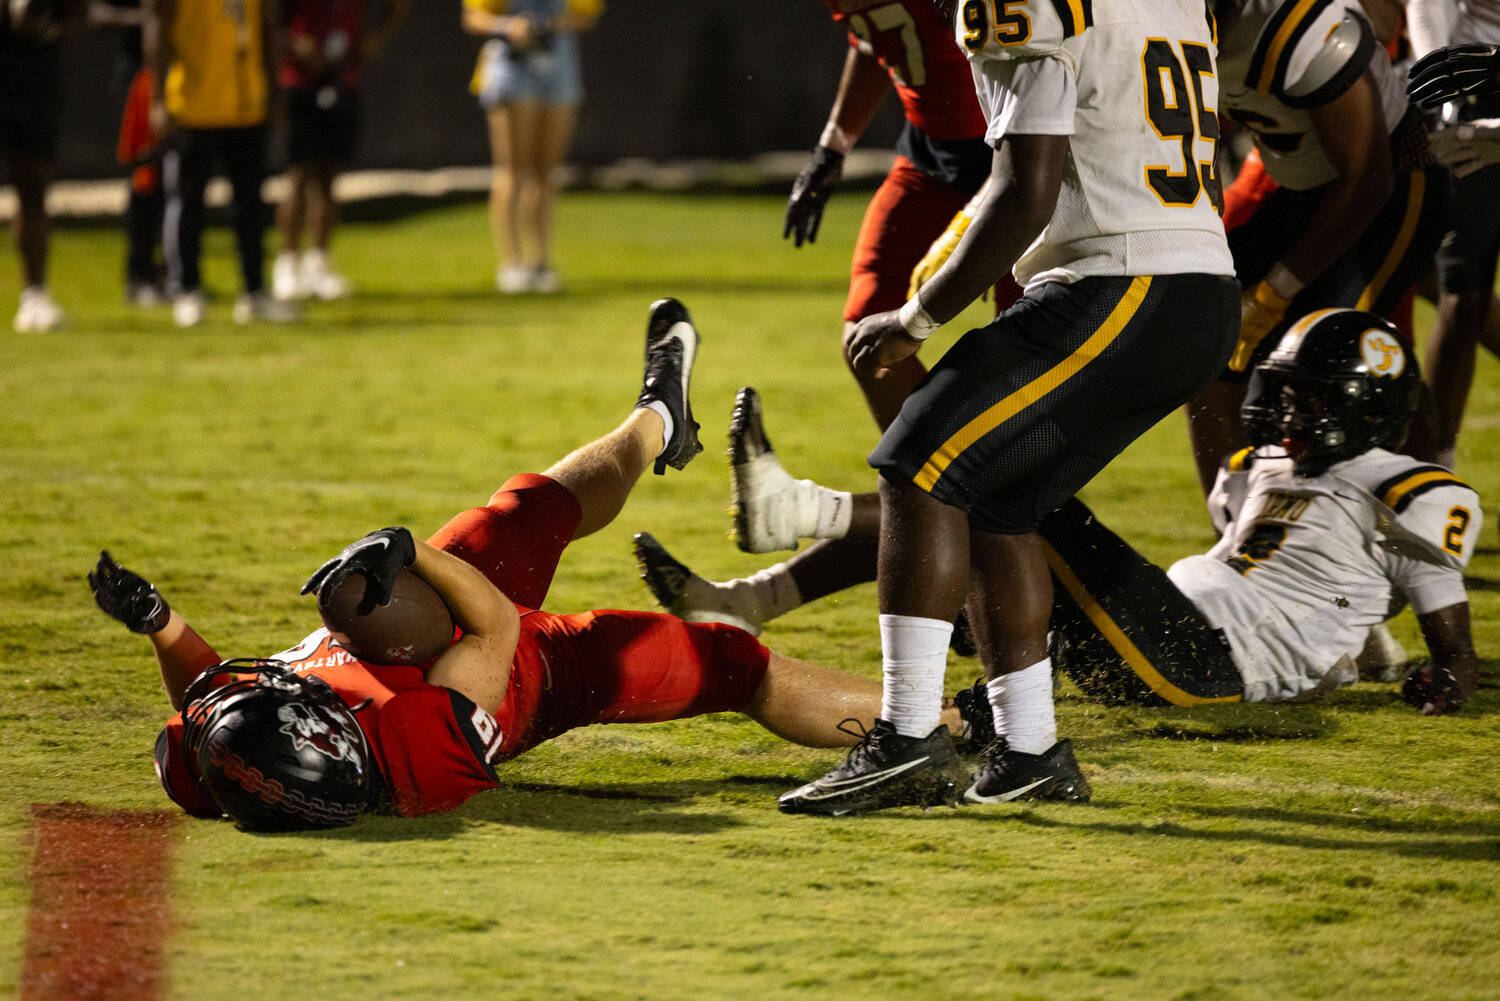 Hartsville wide receiver Jackson Moore slides into the end zone with the ball to score in the fourth quarter, threatening the Irmo lead.